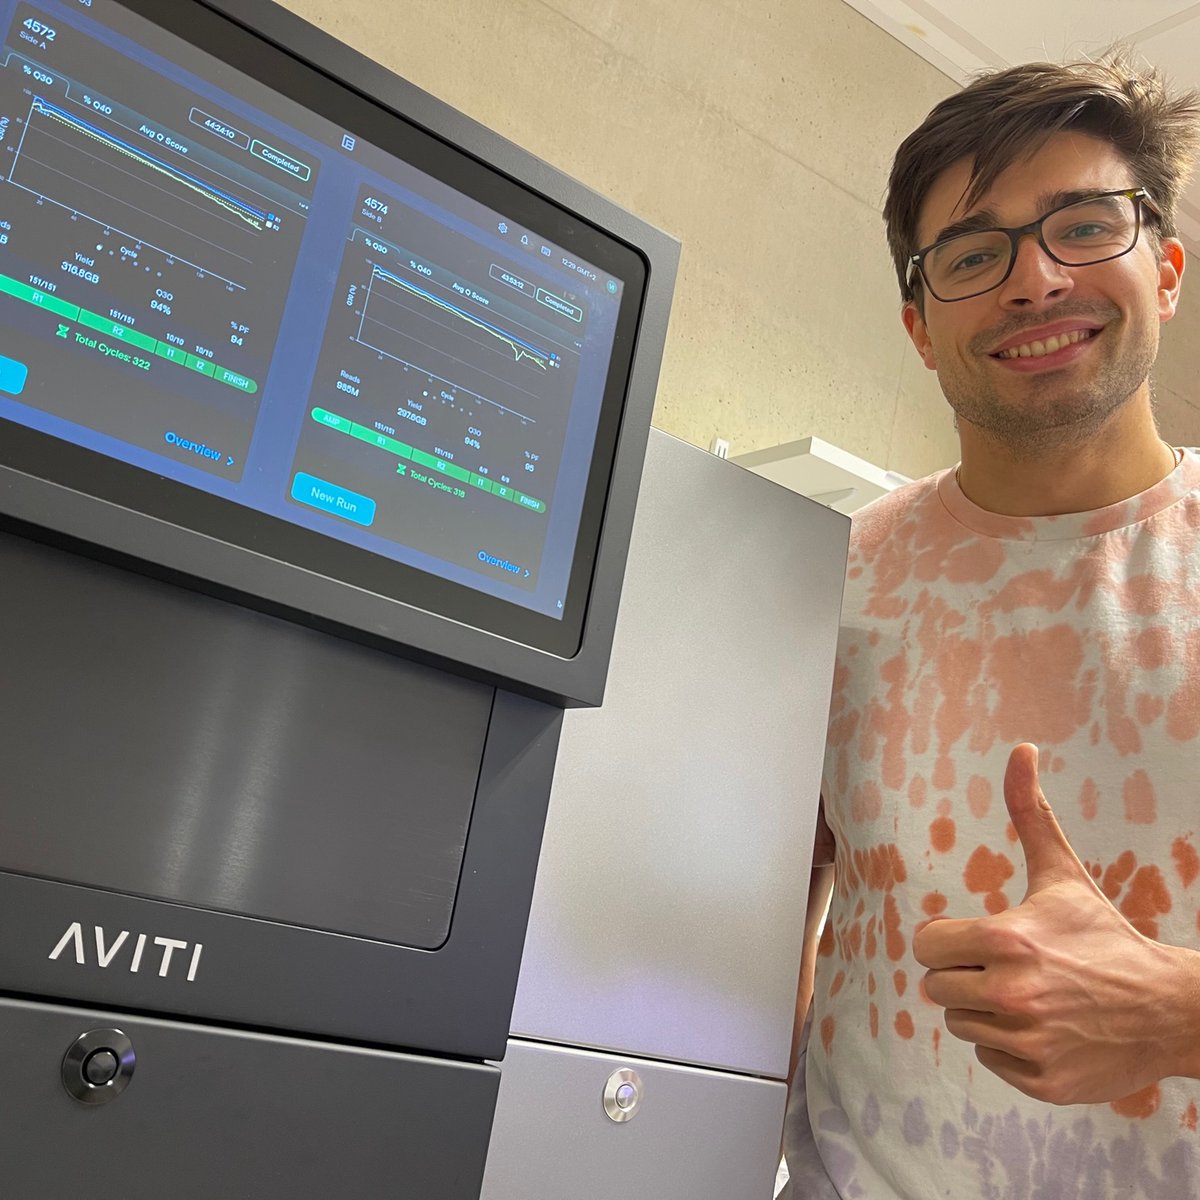 Successfully sequenced 13 different library types so far... On to 100 ? #AVITI100strong #AVITI #Elembio @VIBtechnologies @VIBLifeSciences @ElemBio